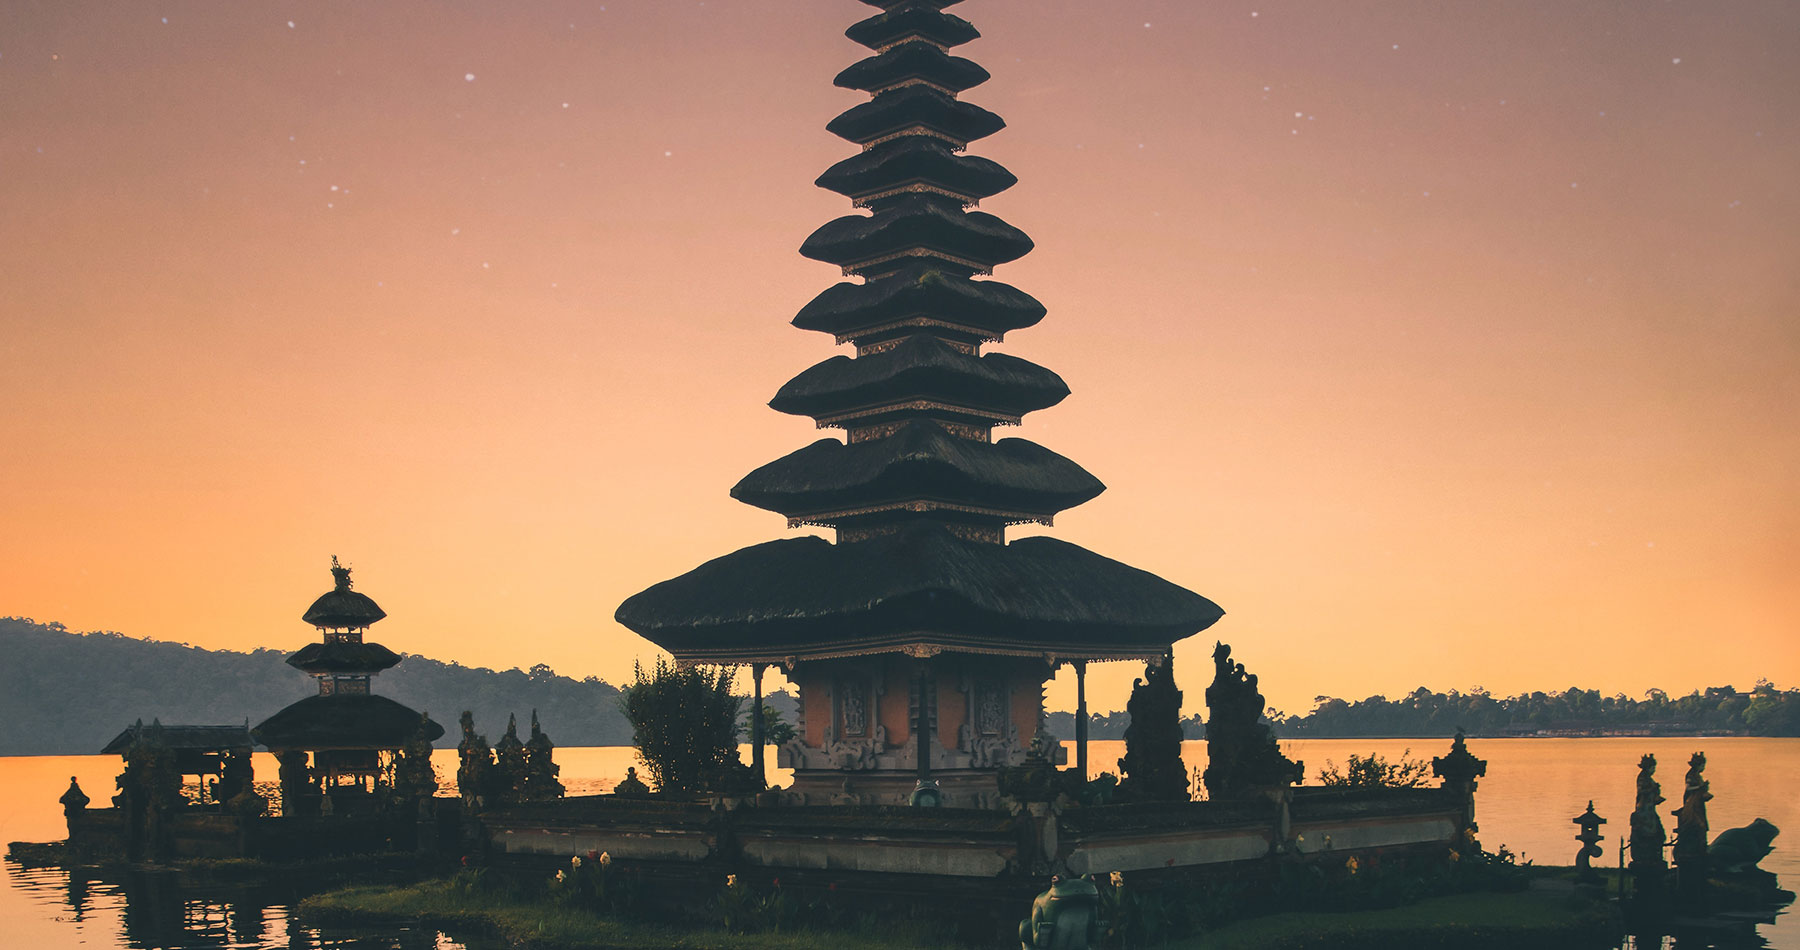 5 Of The Best Places To Visit In Bali, Indonesia